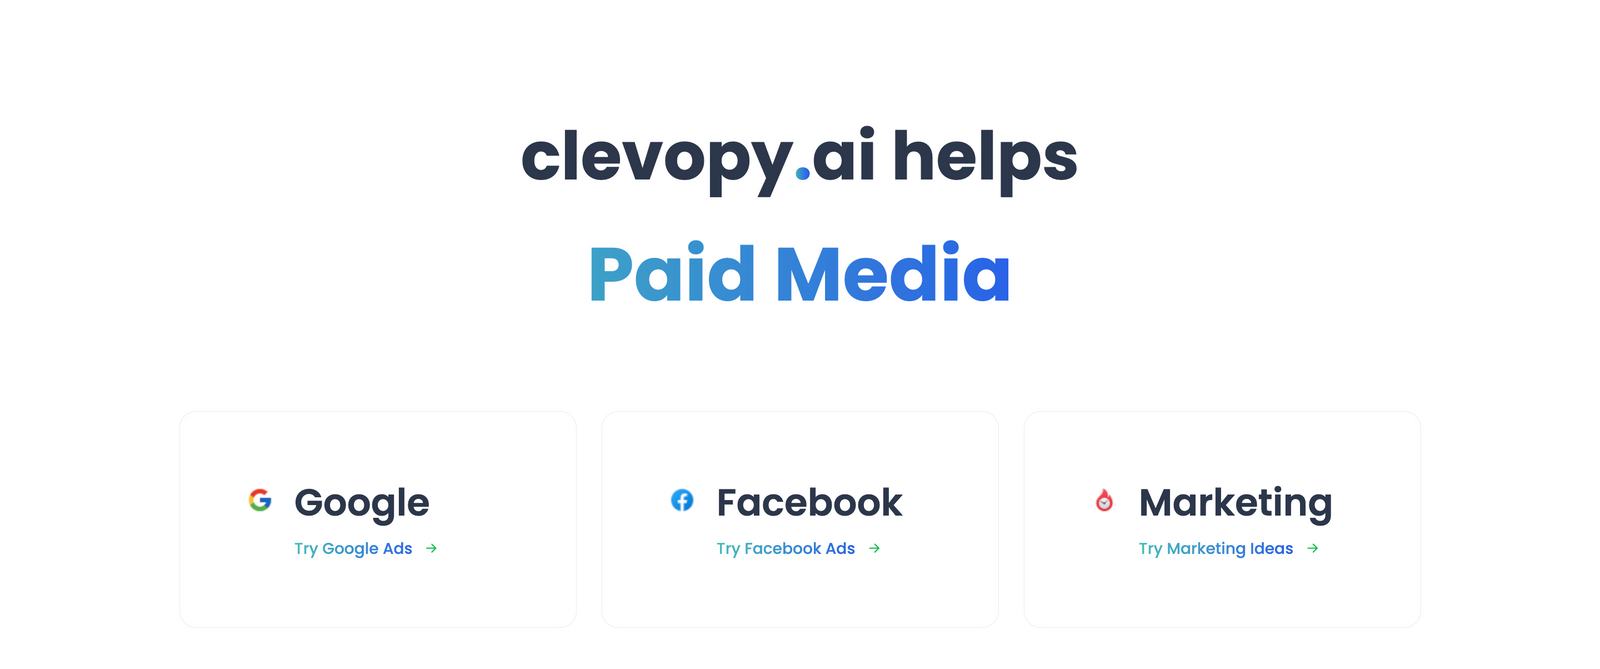 clevopy helps paid media